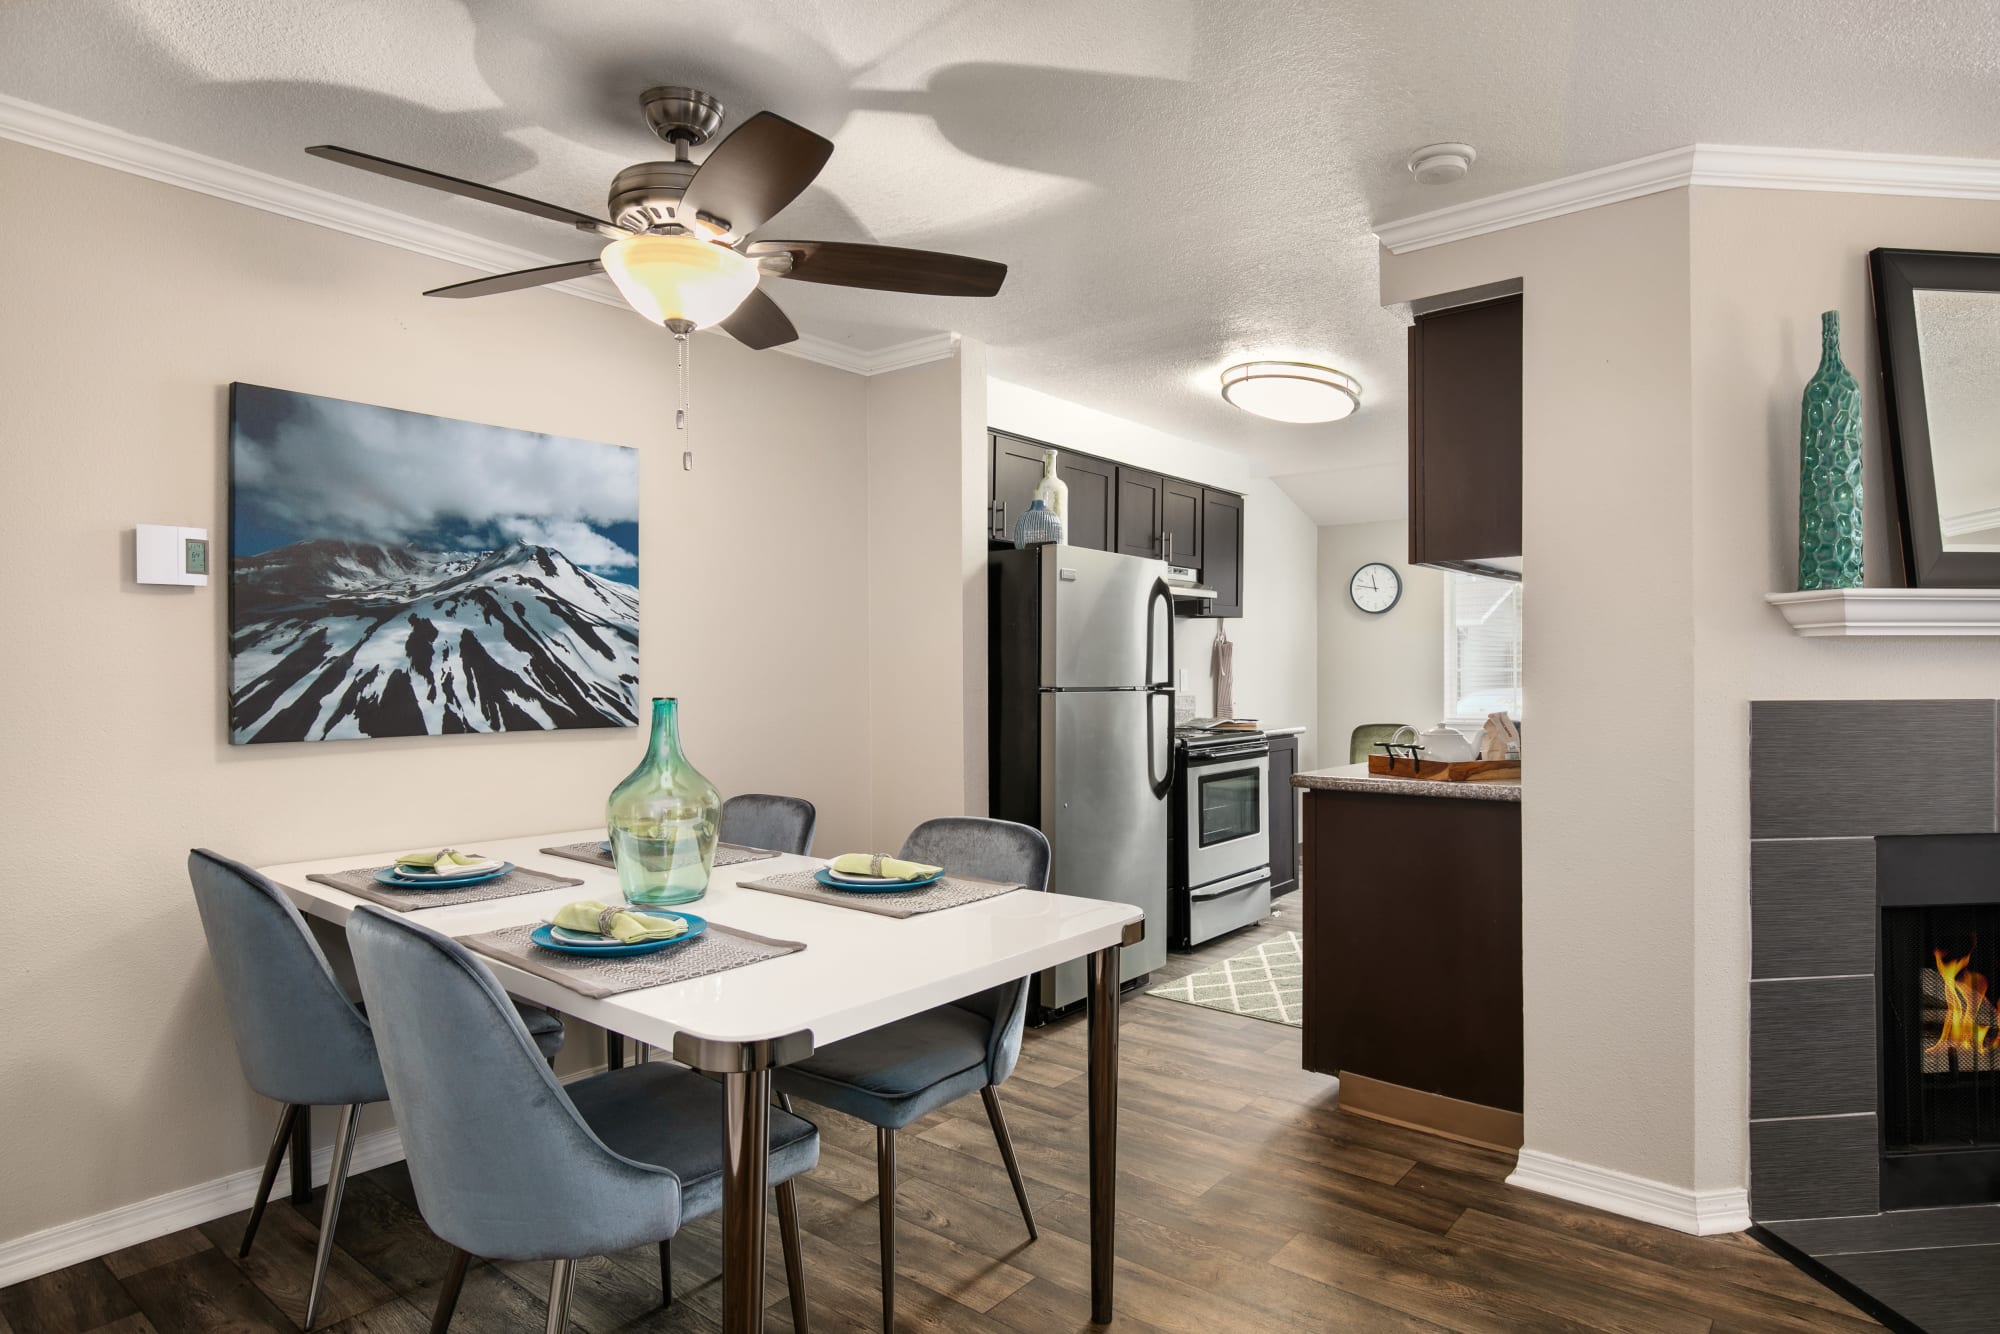 Dining room, kitchen, and a fireplace at Walnut Grove Landing Apartments in Vancouver, Washington